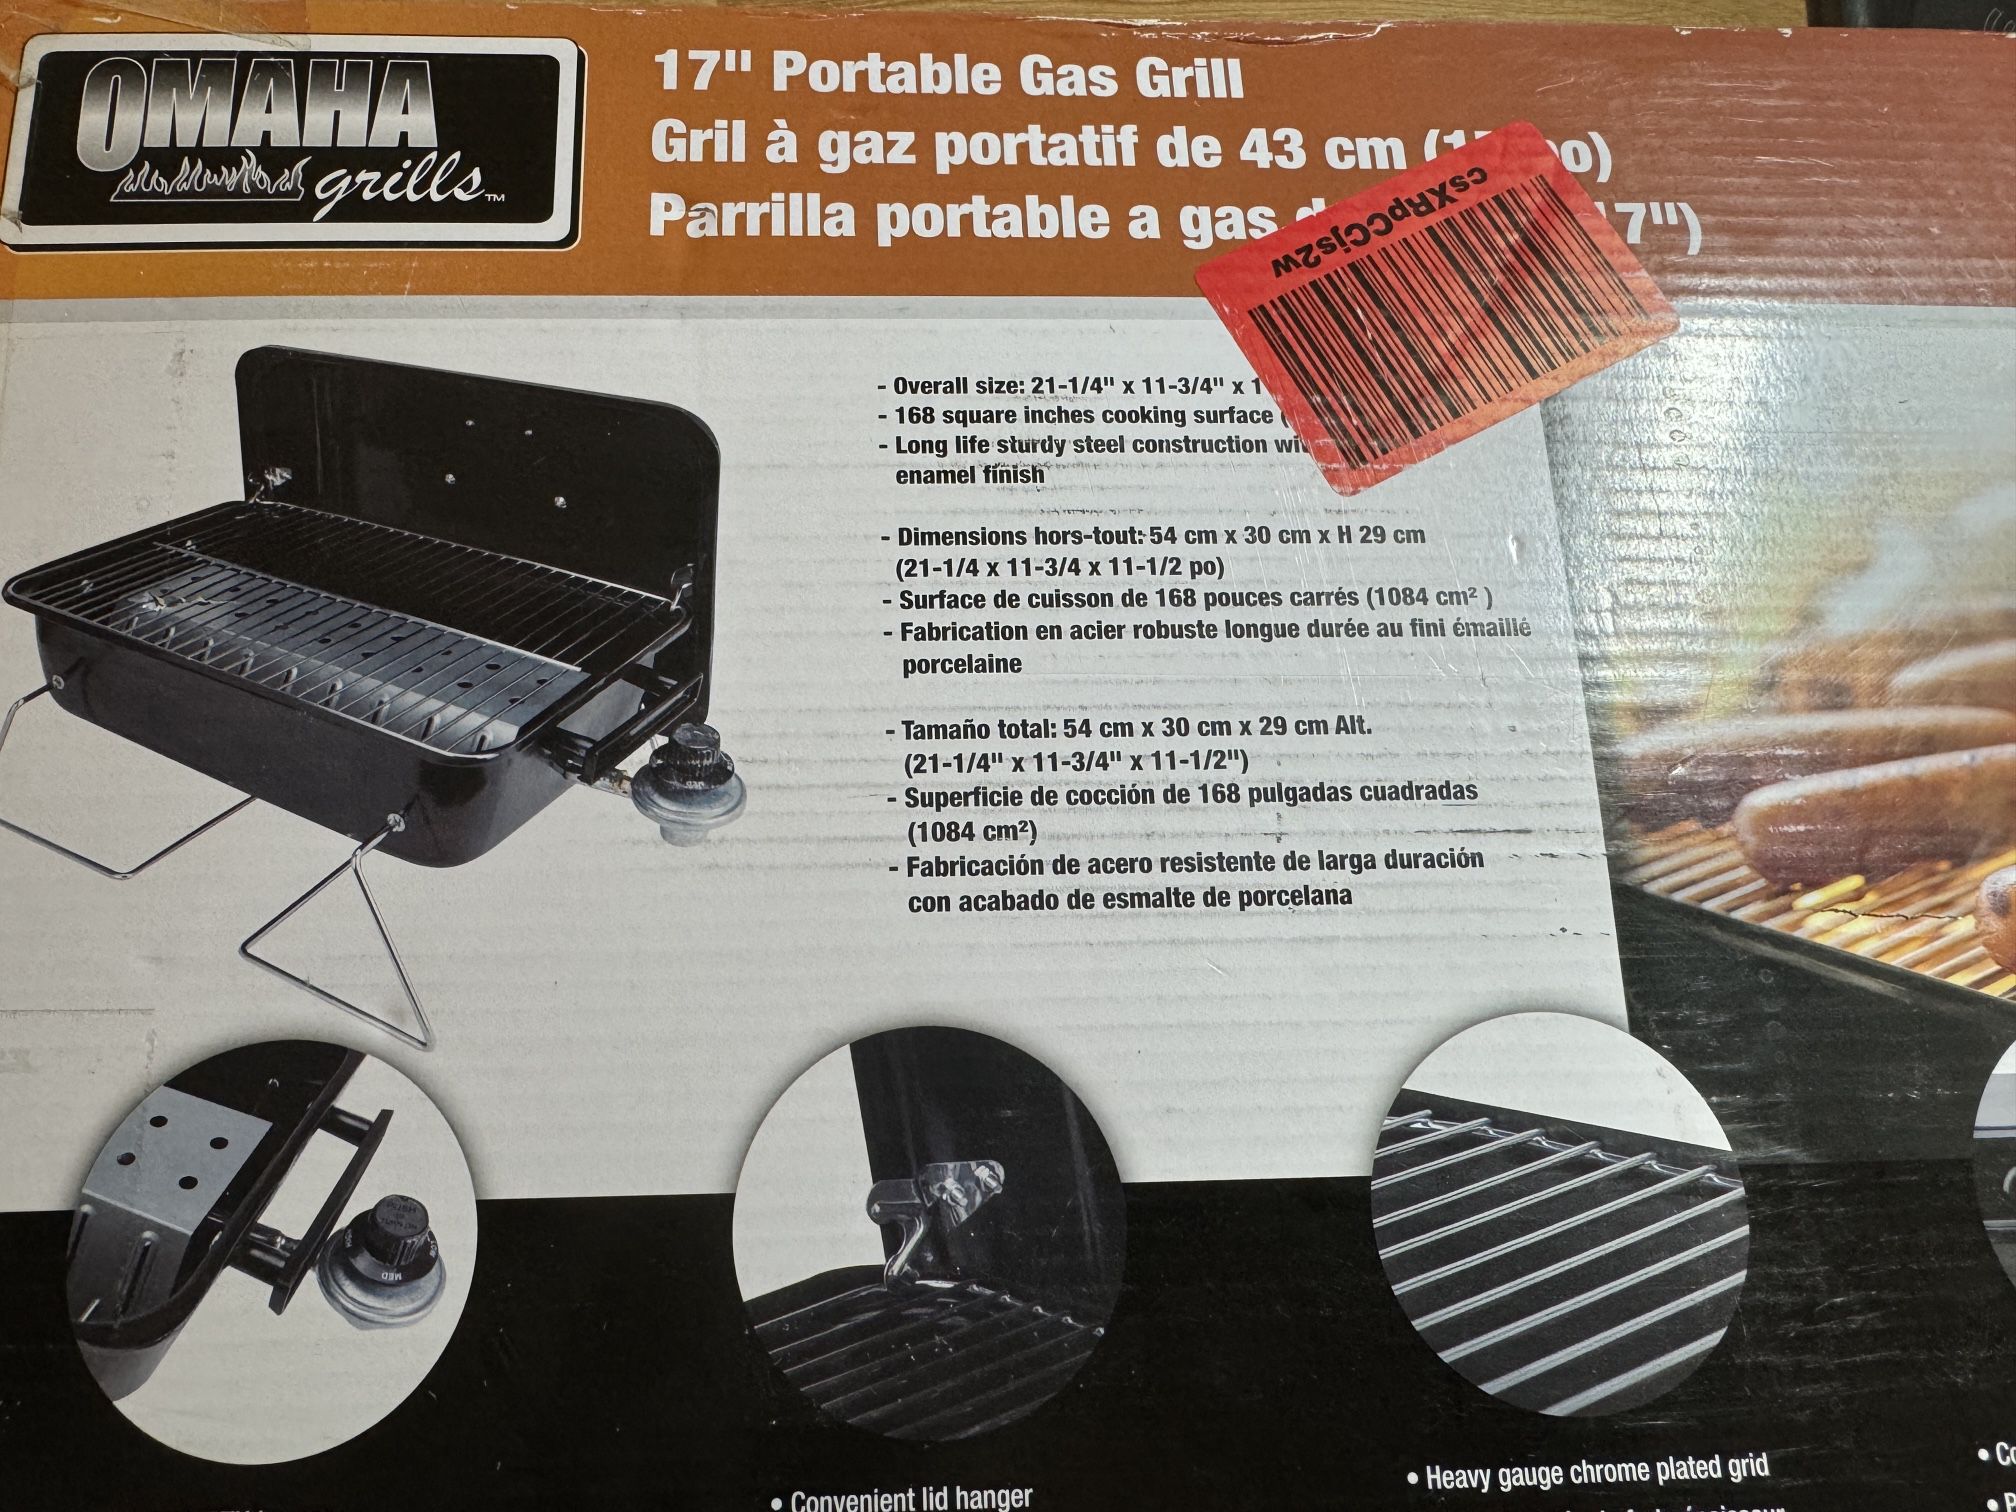 Duke Grills Omaha Go Anywhere Portable Gas Grill - Mini BBQ Propane Grill Camping RV Tailgate